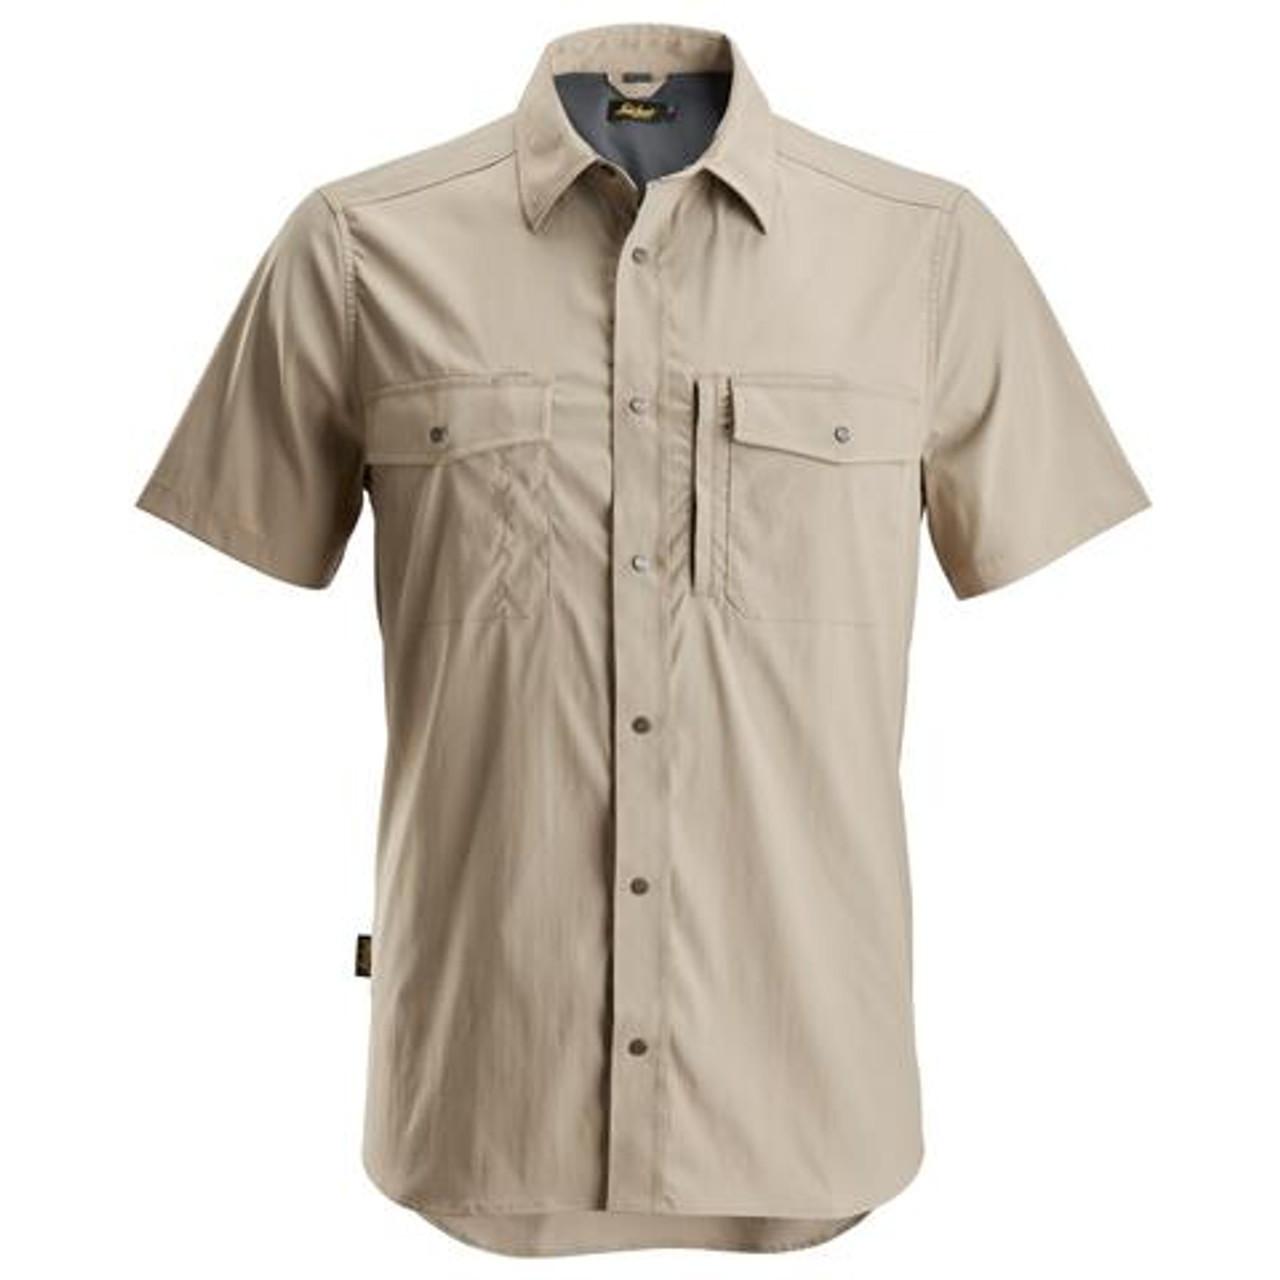 Buy Online SNICKERS Khaki Shirt with Short Sleeves for the Construction Industry and Operators in Western Australia and South Australia.